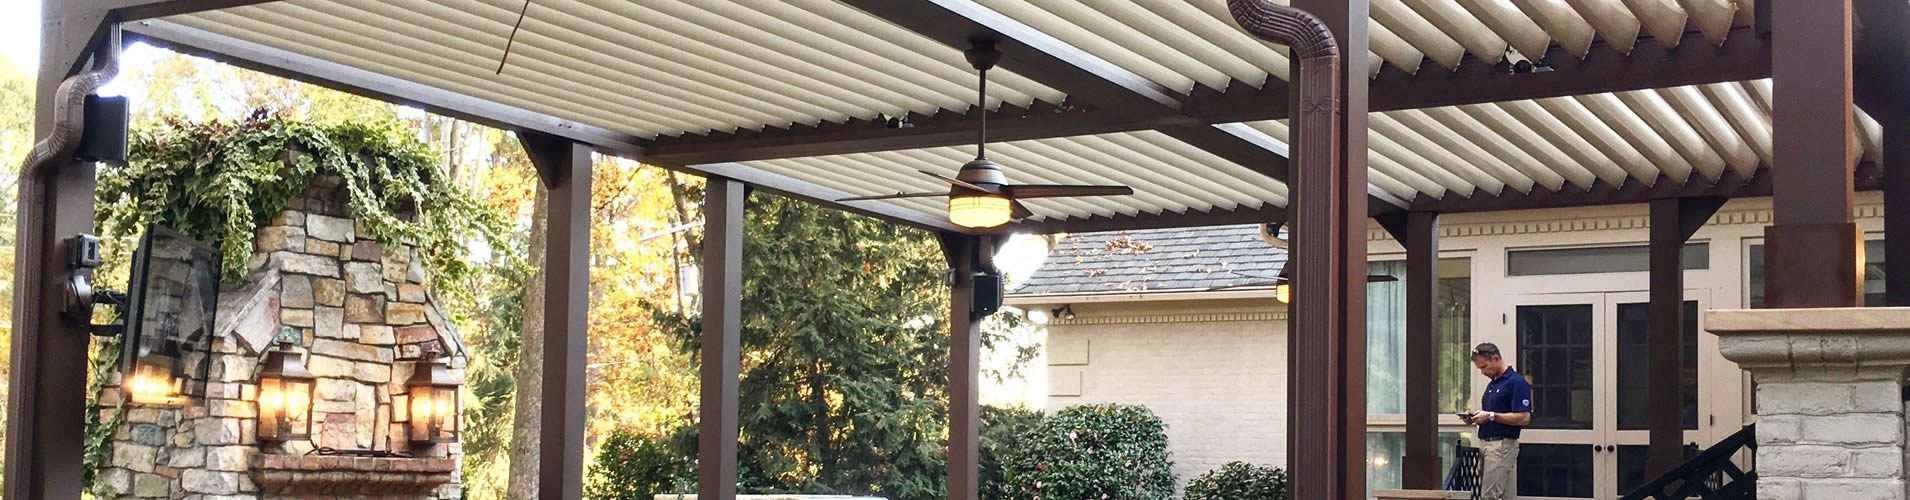 Patio Covers, Louvered Roofs - Dallas/Fort Worth